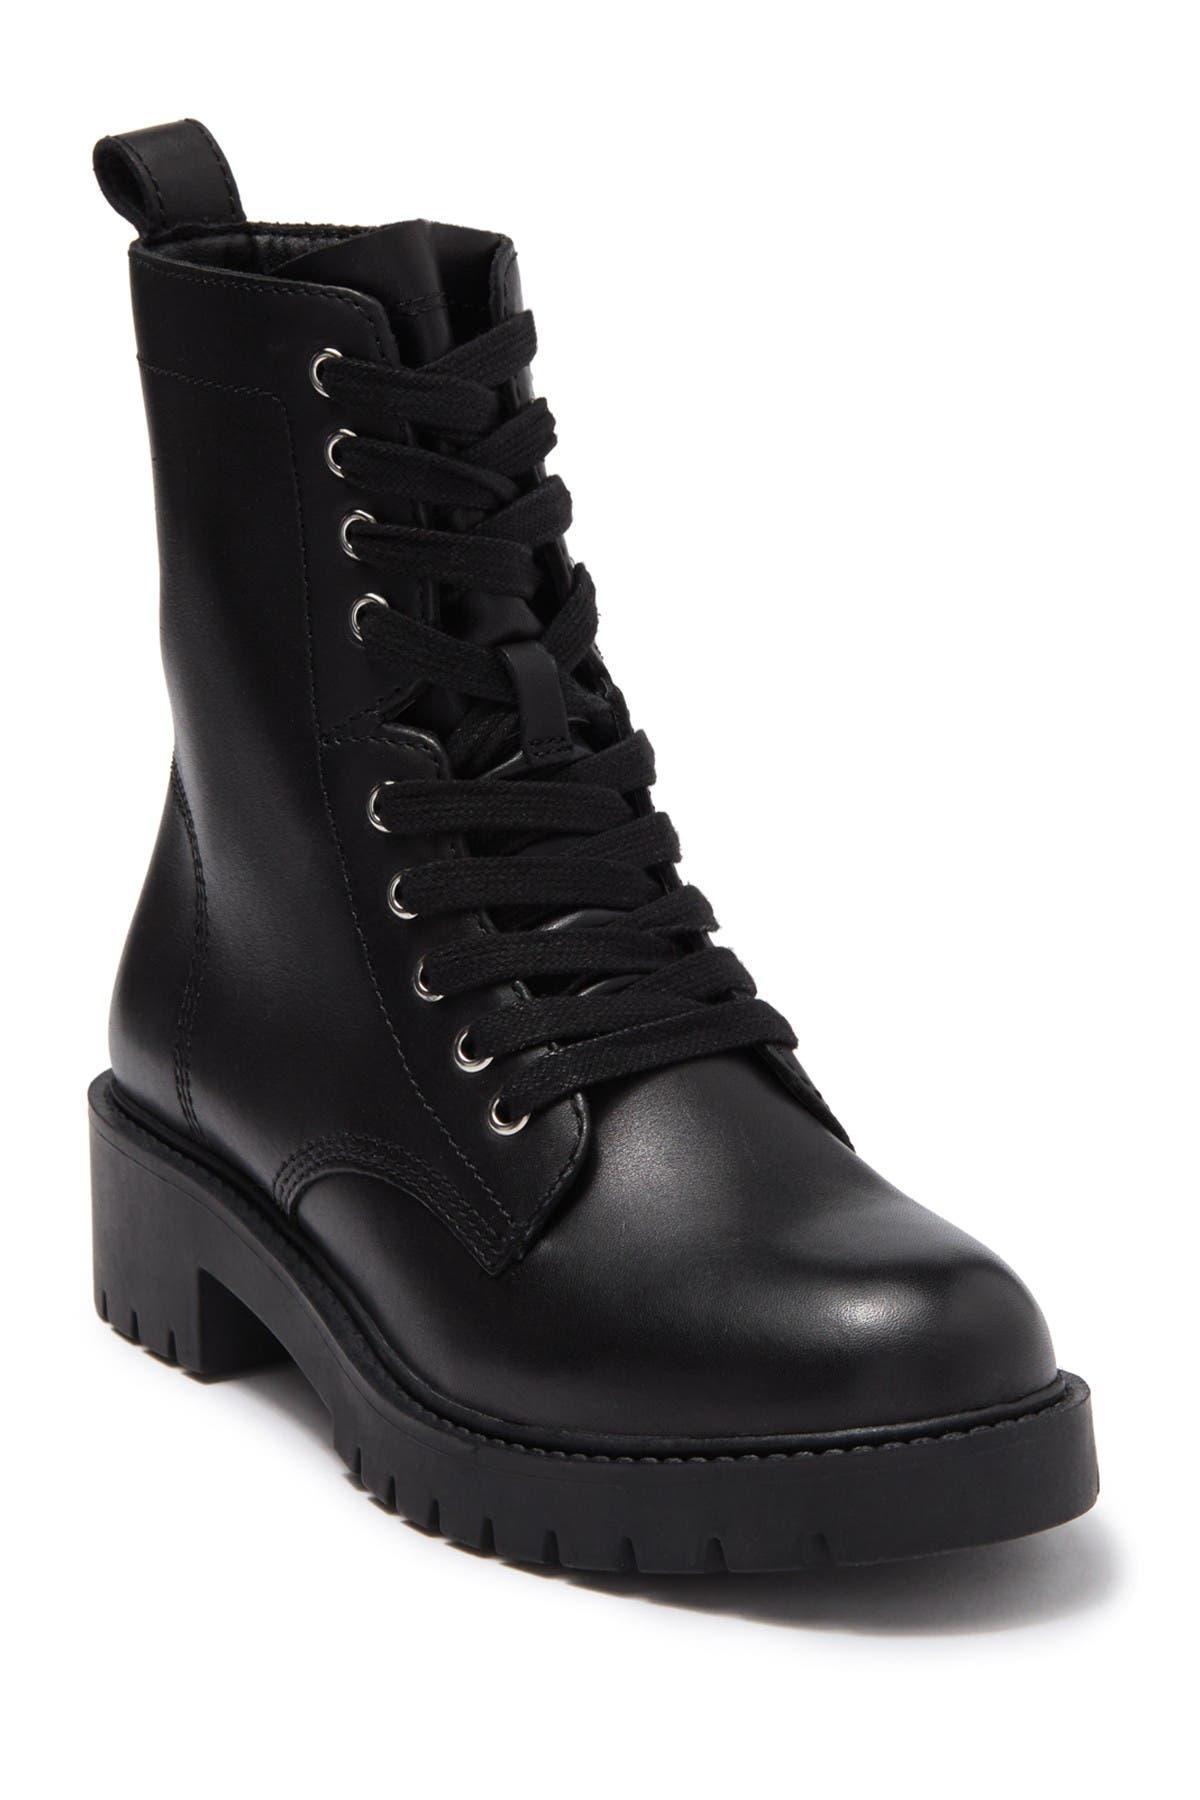 Steve Madden Checker Lug Sole Combat Boot In Black Leat At Nordstrom Rack |  Lyst